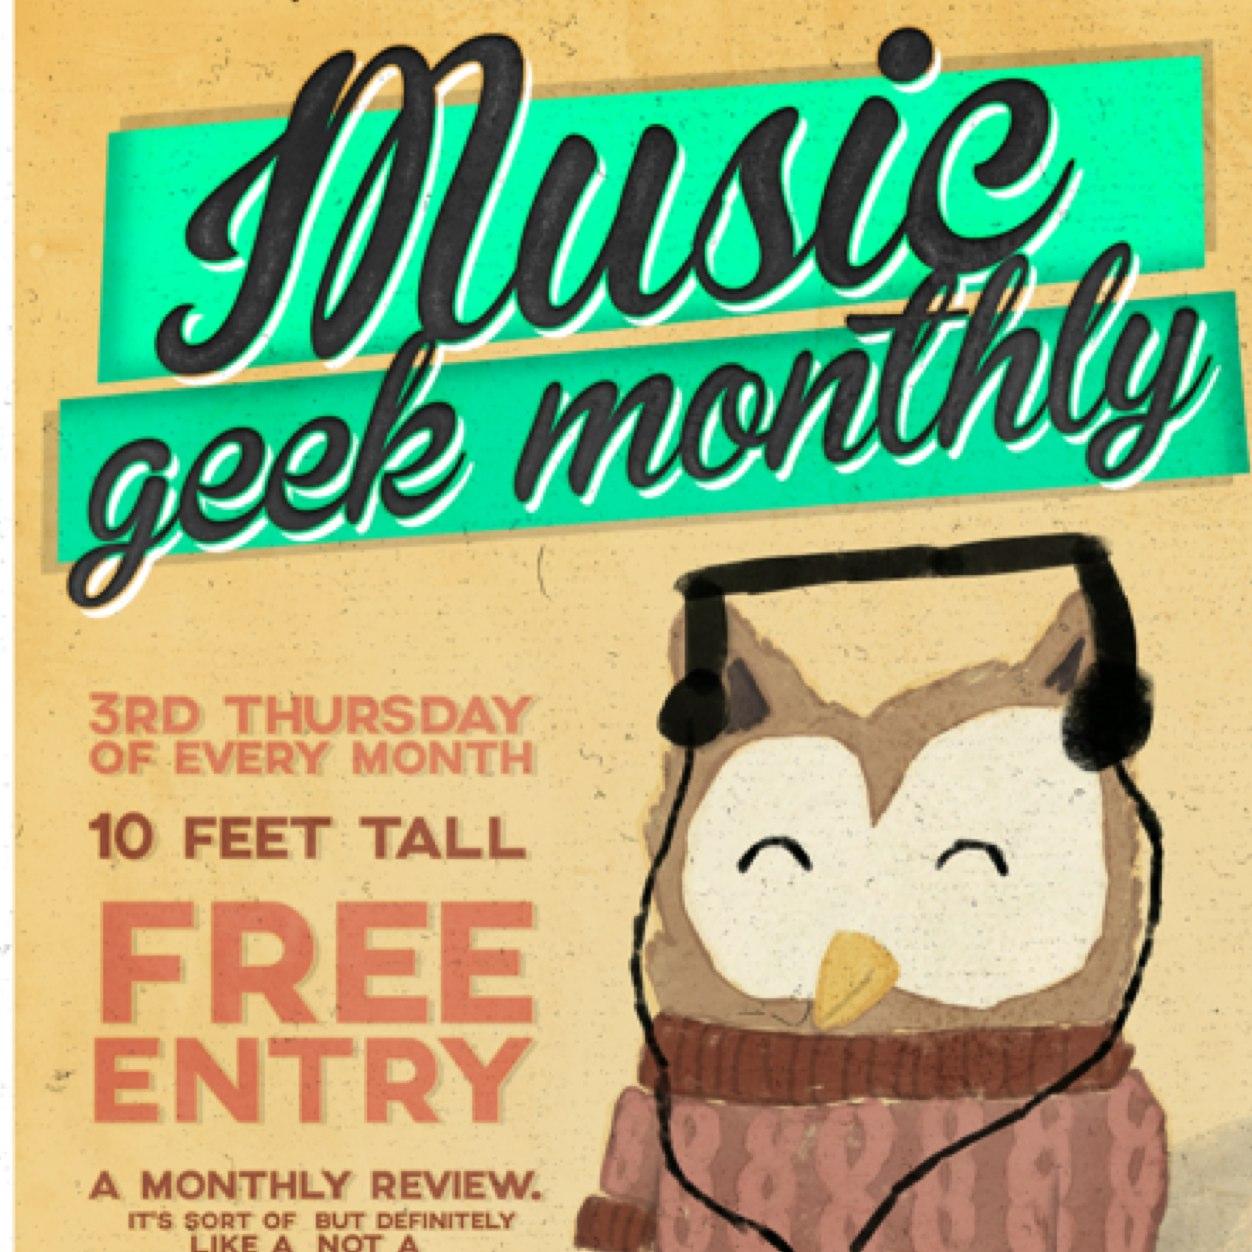 Twitter feed for Music Geek Monthly. A new music discussion night in Cardiff. Like a bookclub, but not a book club. Run by @fuzzylogic1981